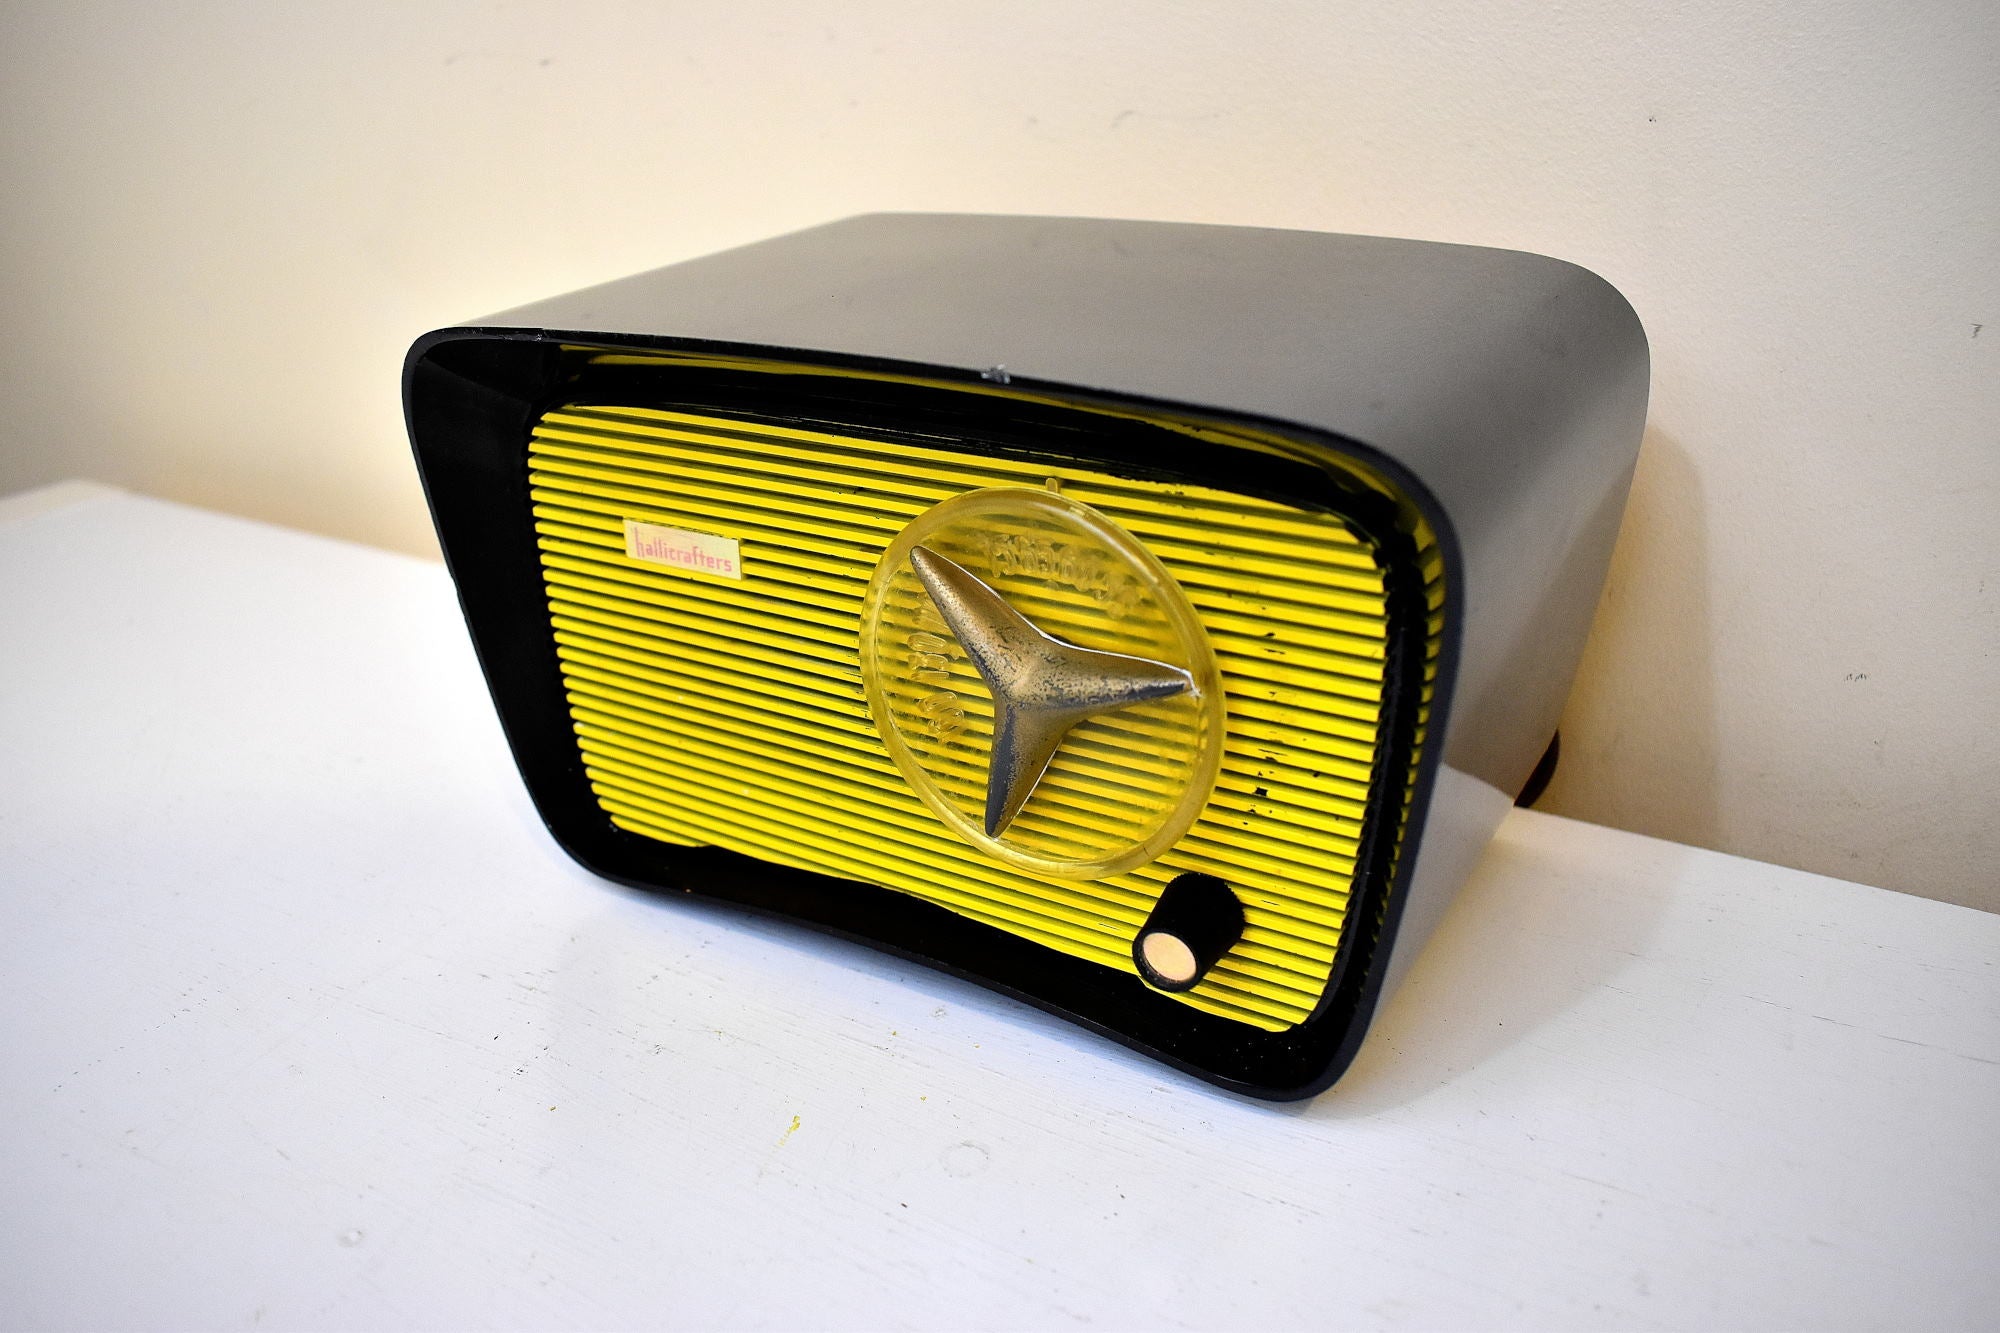 Bumble Bee Yellow and Black 1959 Hallicrafters Model HT203 Vacuum Tube AM Radio Sounds Terrific! So Cute!